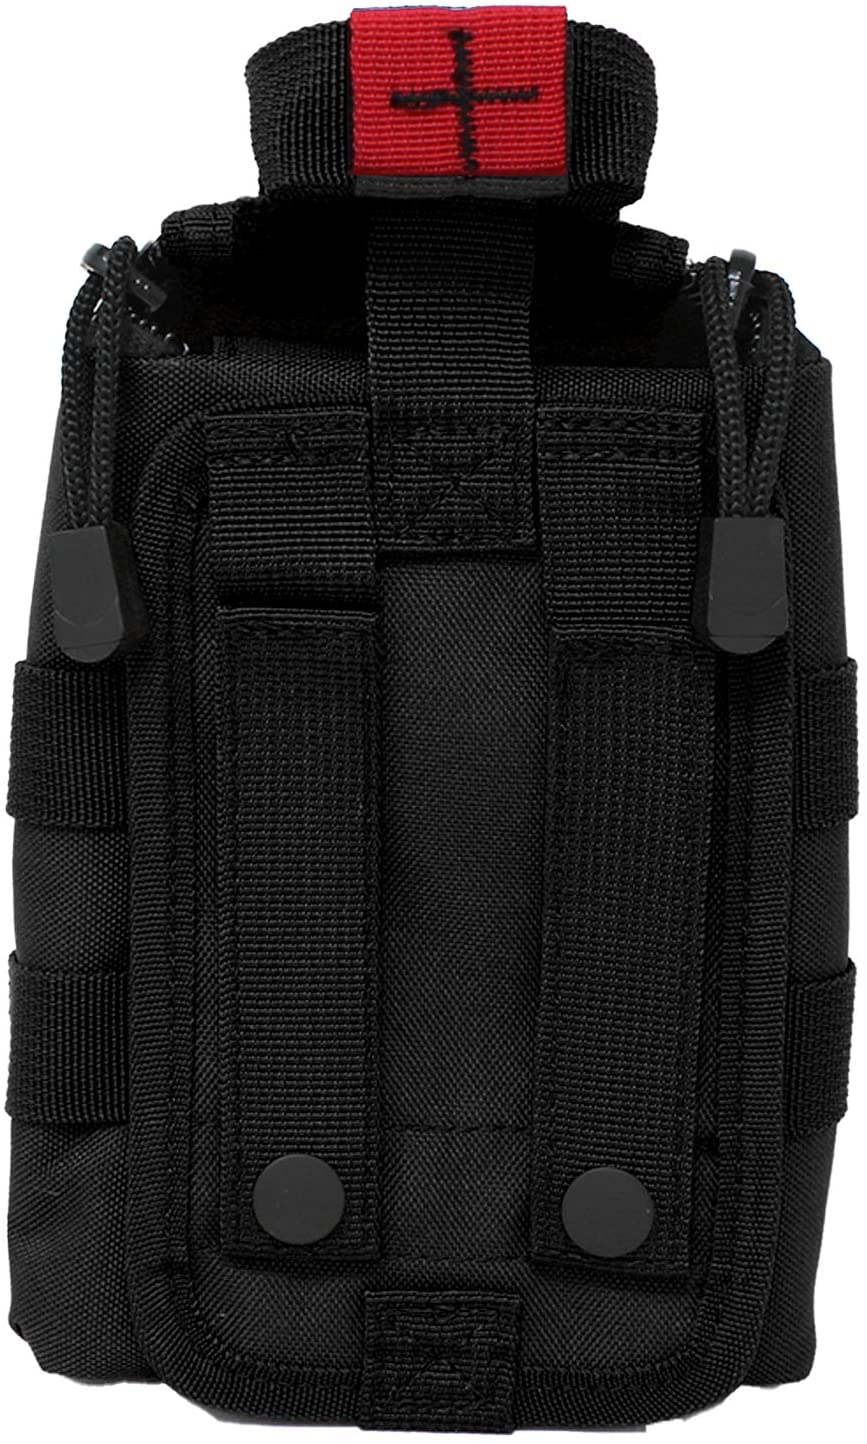 Meditac Tactical Eagle Type MOLLE EMT Medical First Aid IFAK Utility Pouch Rip-Away Pouch (Bag Only)